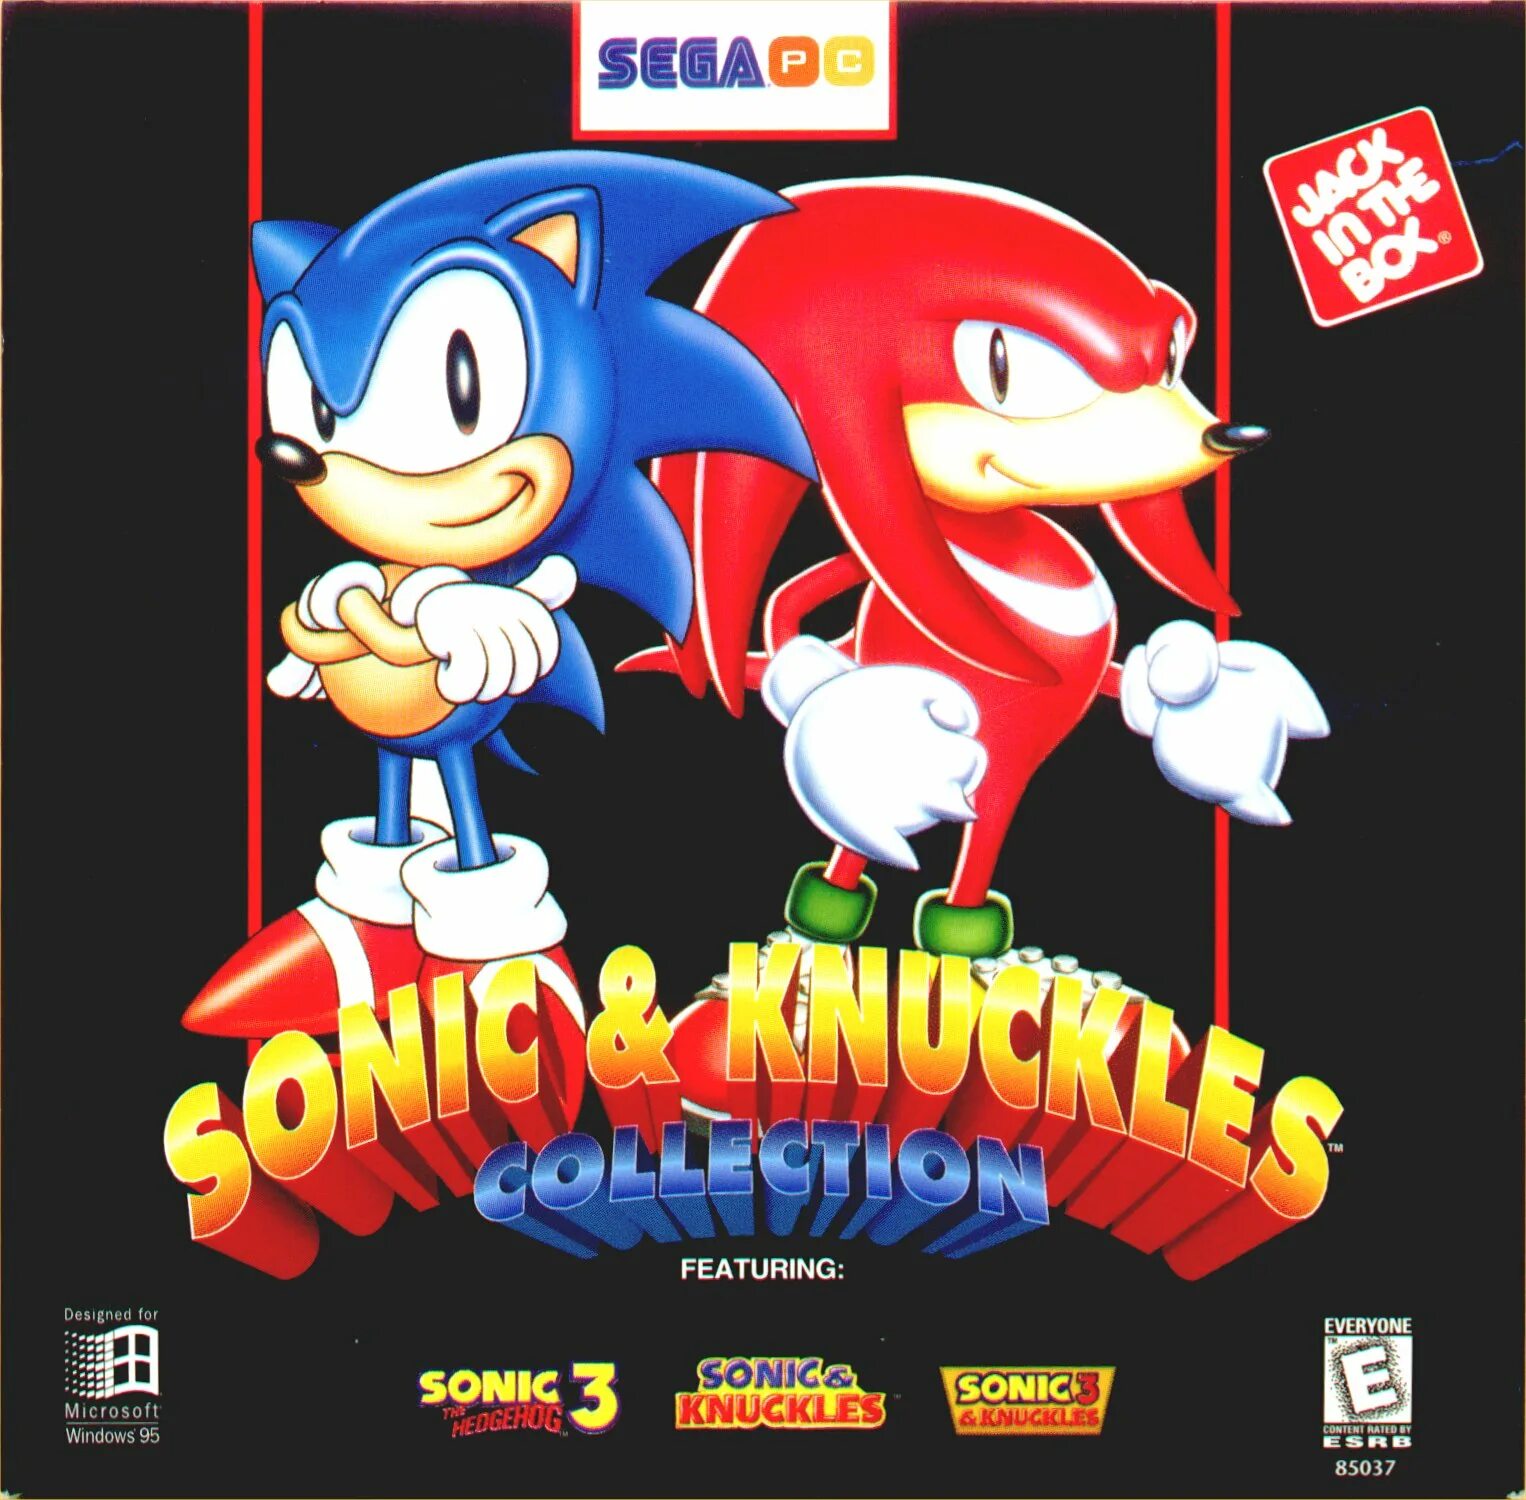 Sonic and knuckles download. Sonic 3 and Knuckles обложка. Sonic & Knuckles обложка. Sonic Knuckles игра. Sonic & Knuckles collection.